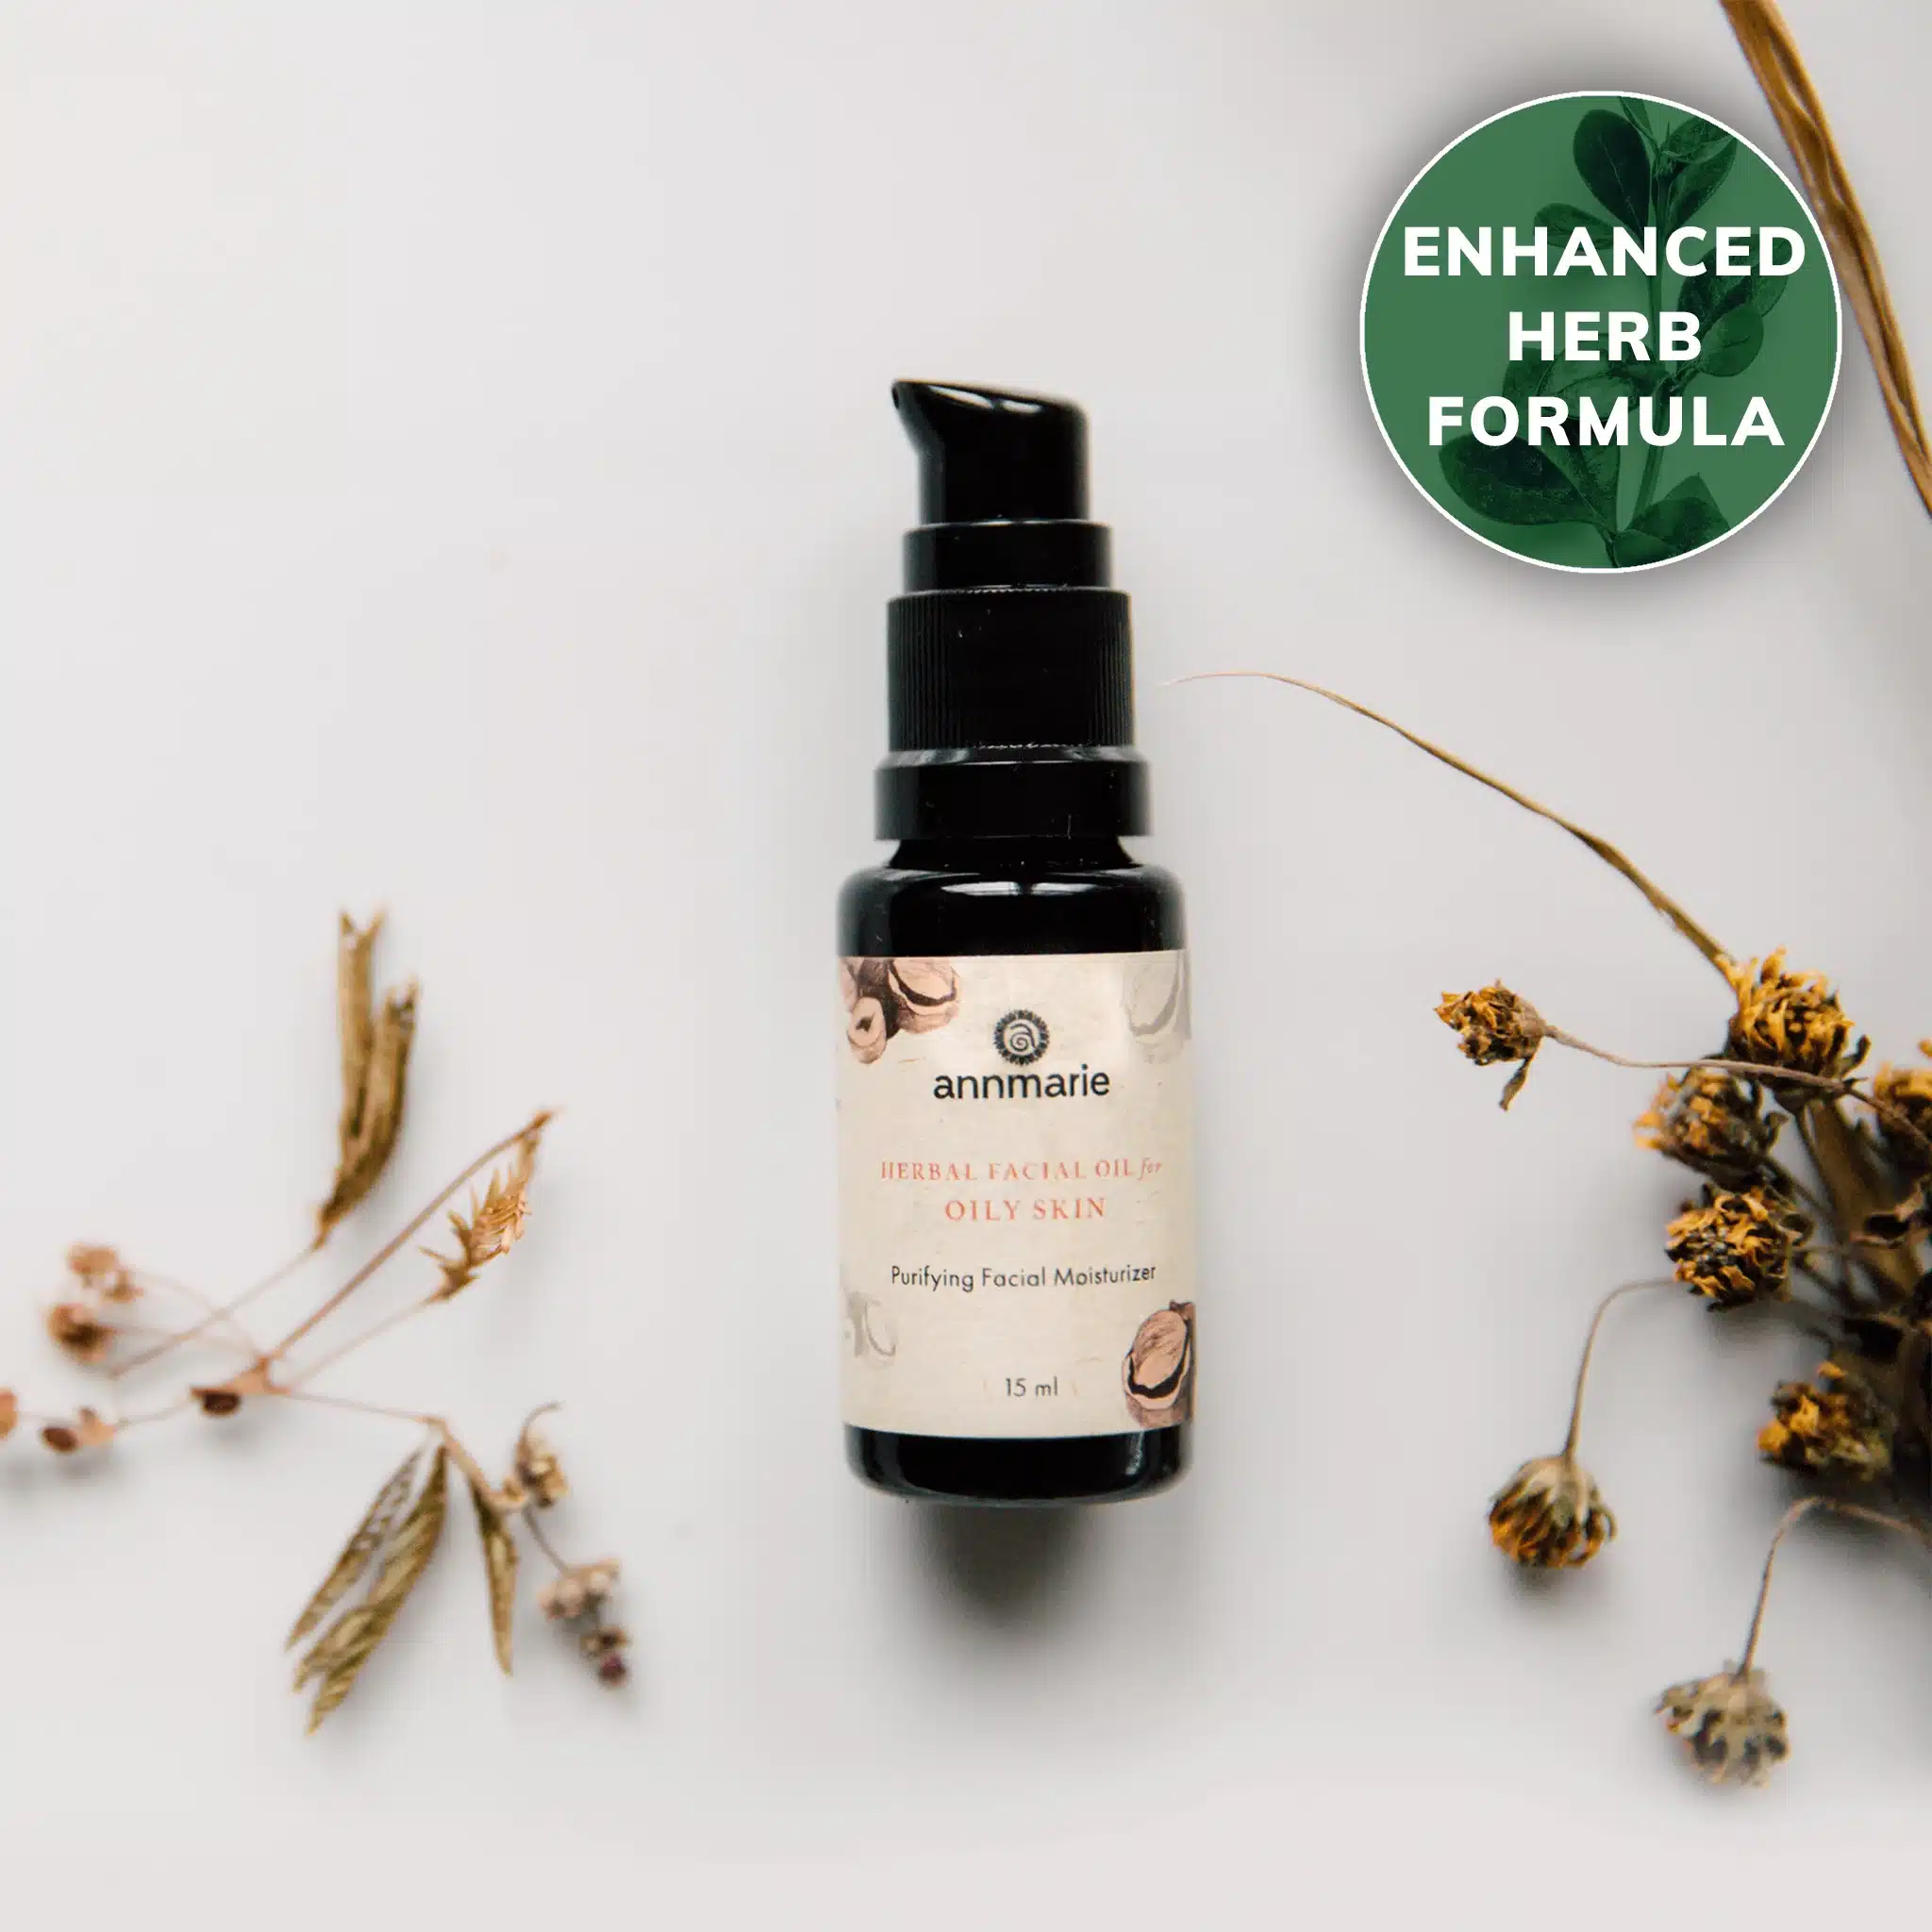 herbal facial oil review as a facial moisturizer and daily moisturizer for cystic acne and leaving he skin matte finish